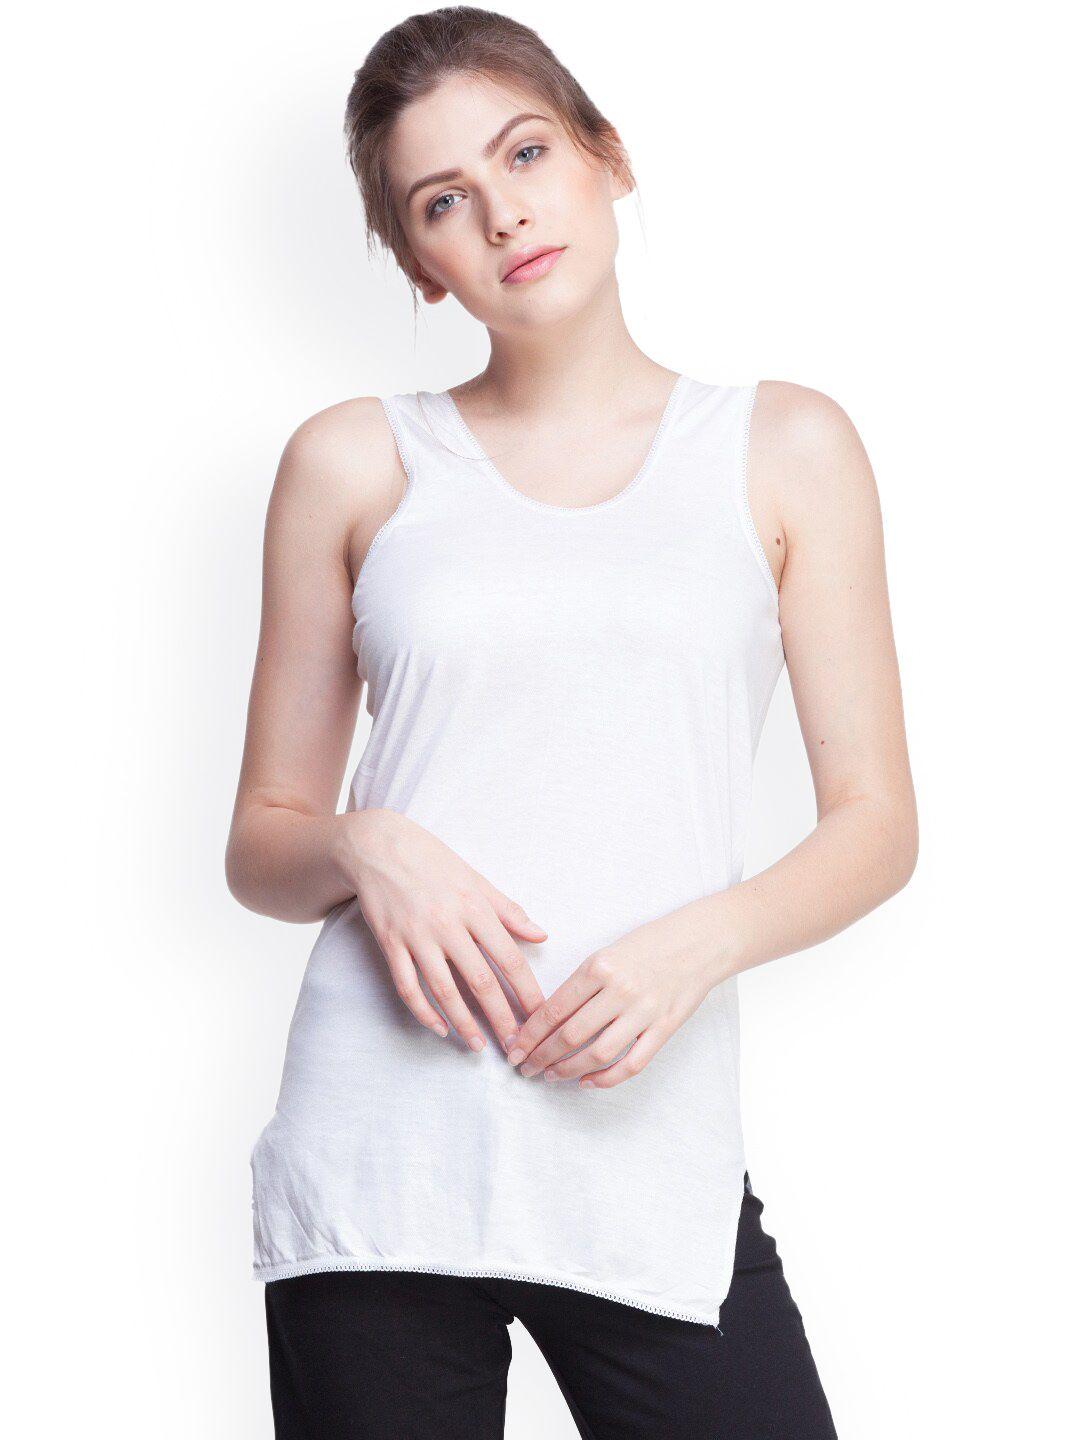 dollar-missy-women-pack-of-2-white-solid-cotton-camisoles